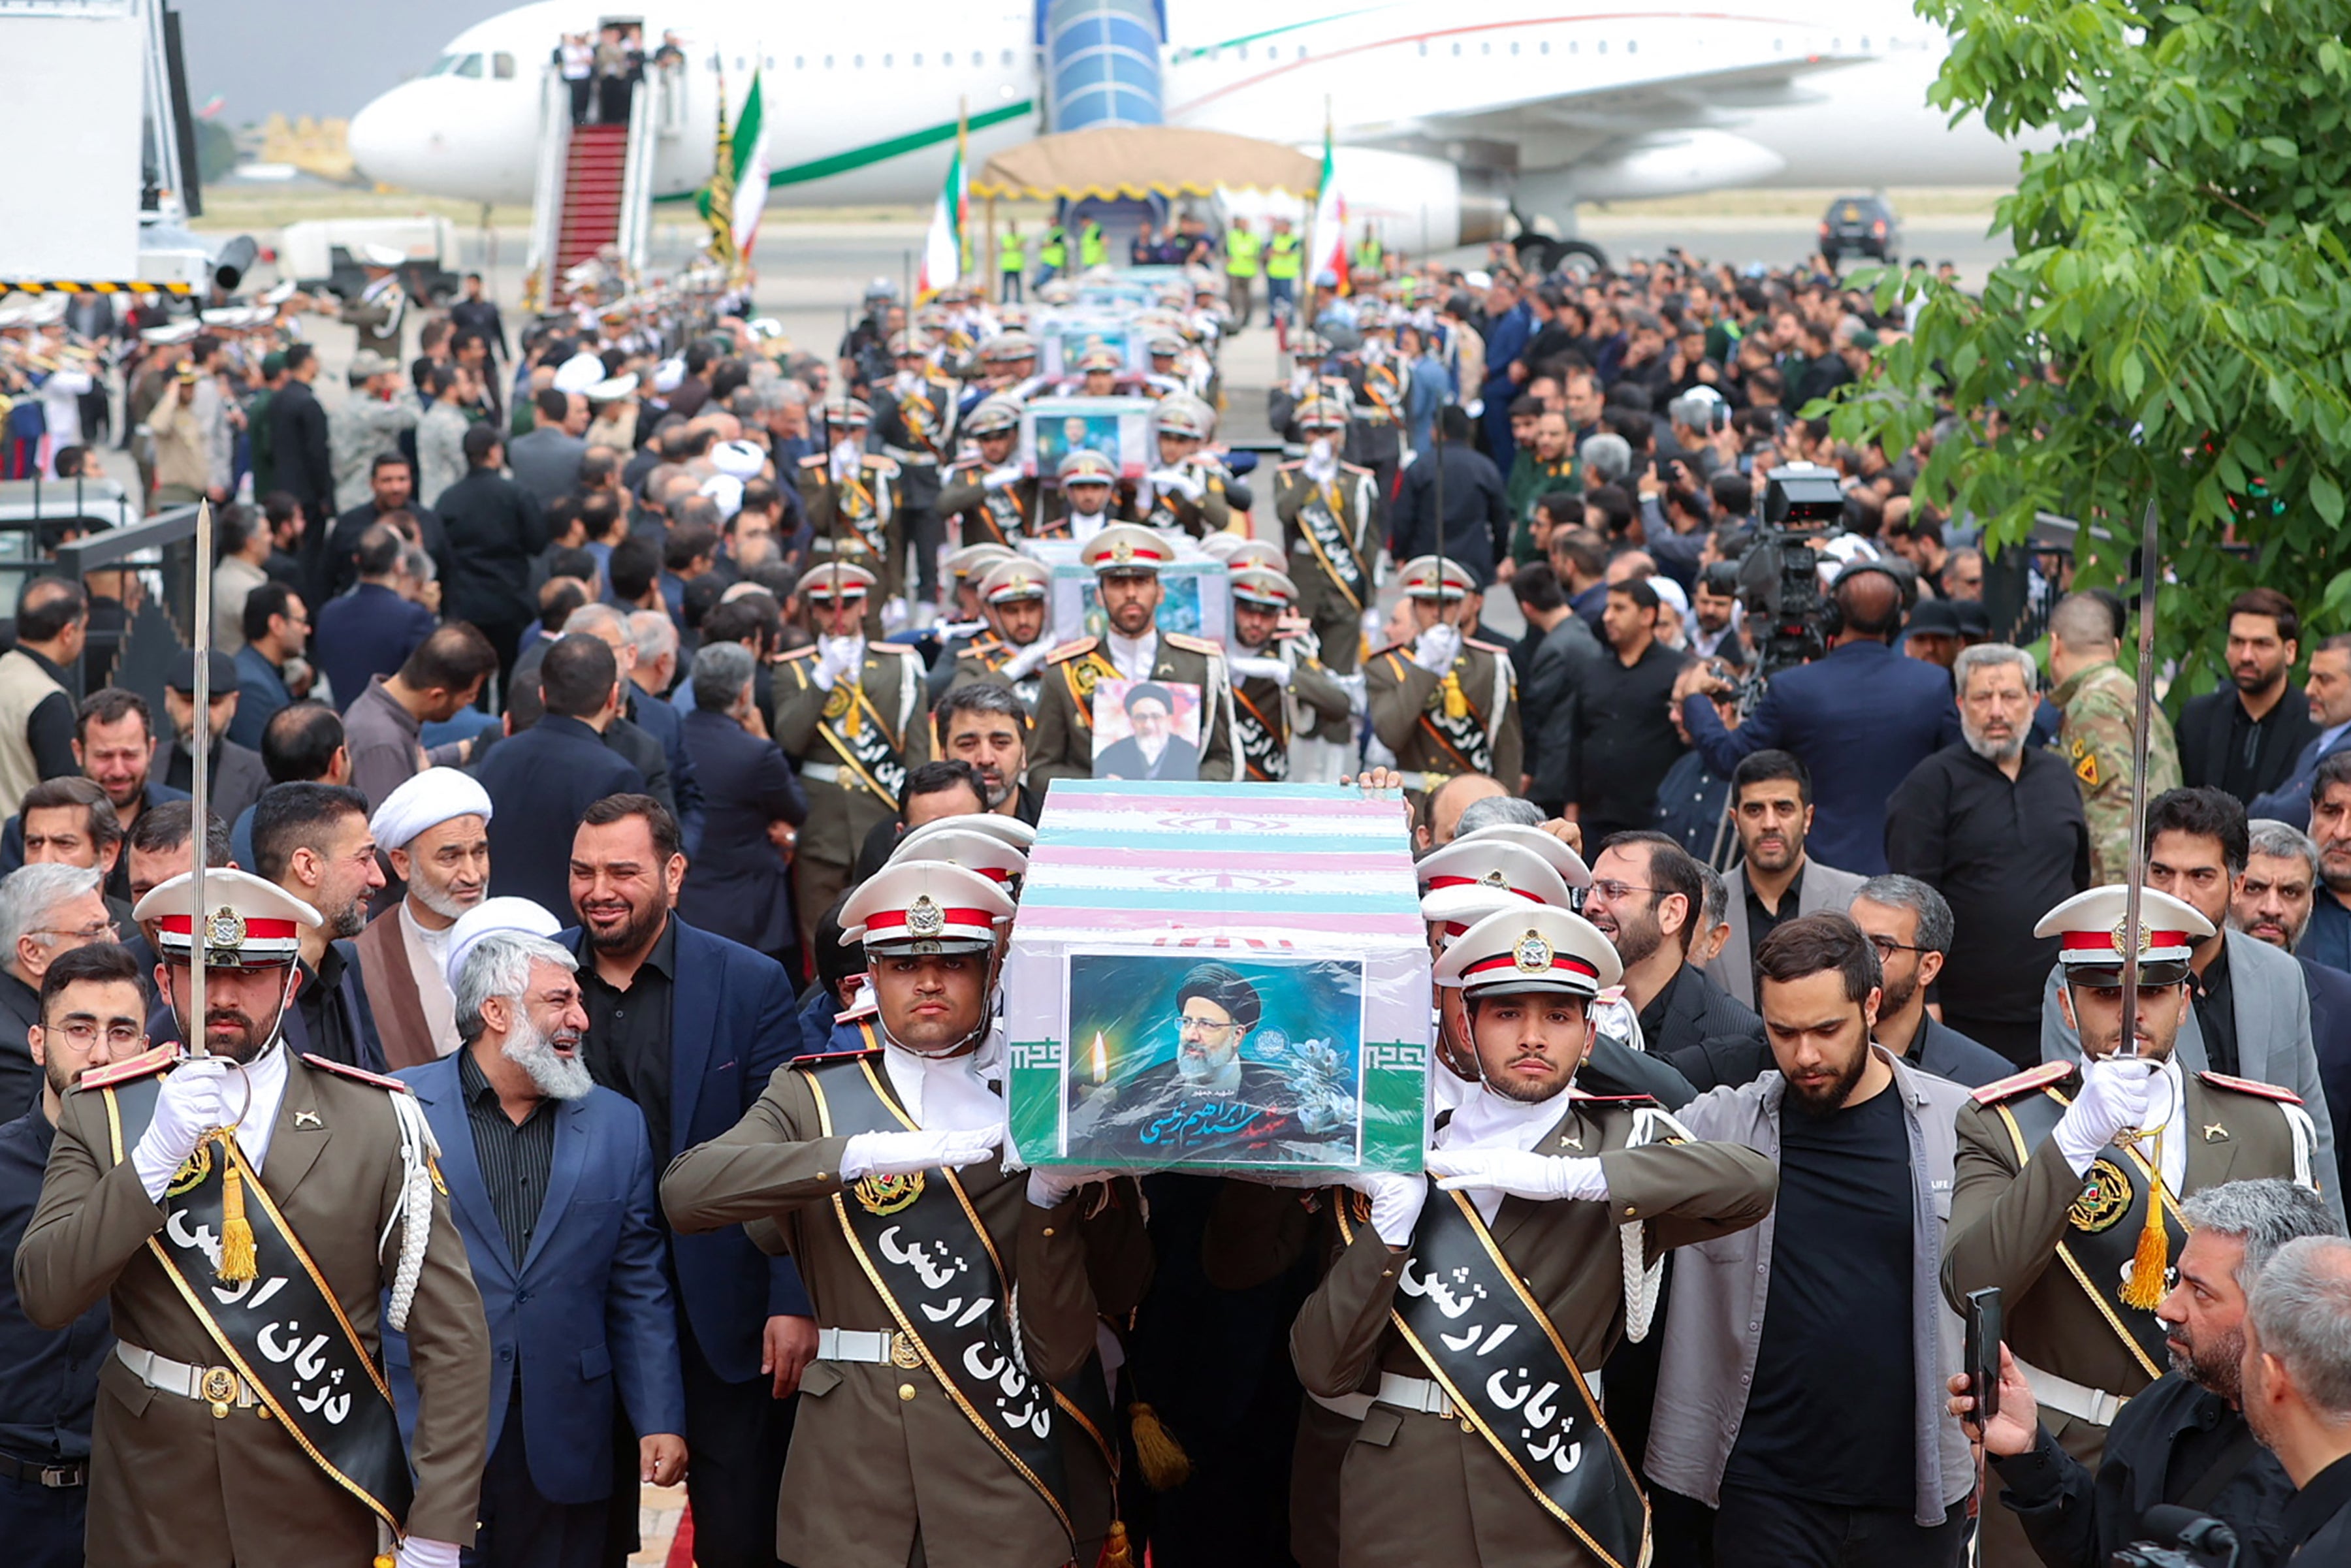 This handout picture provided by the Iranian president's office shows honour guards carrying the coffin of late Iran's President Ebrahim Raisi as officials weep in the background